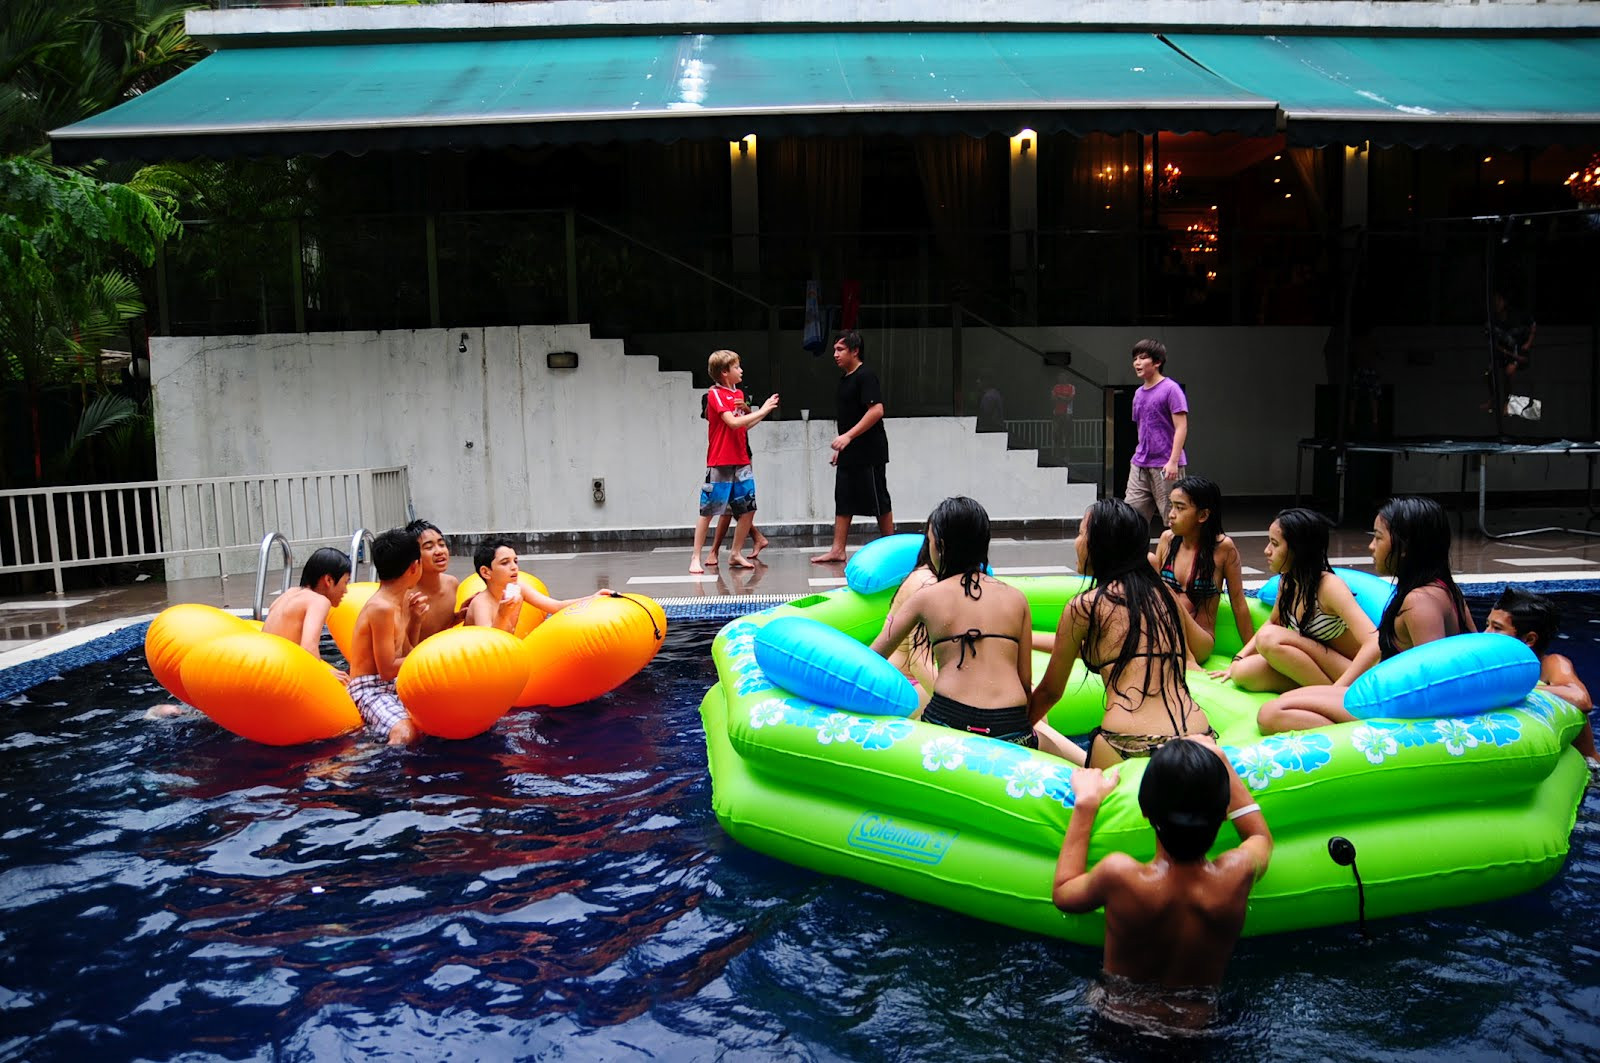 Adult Pool Party Ideas
 Event DirecTus Pool Party FUN for KIDS TEENS & ADULTS